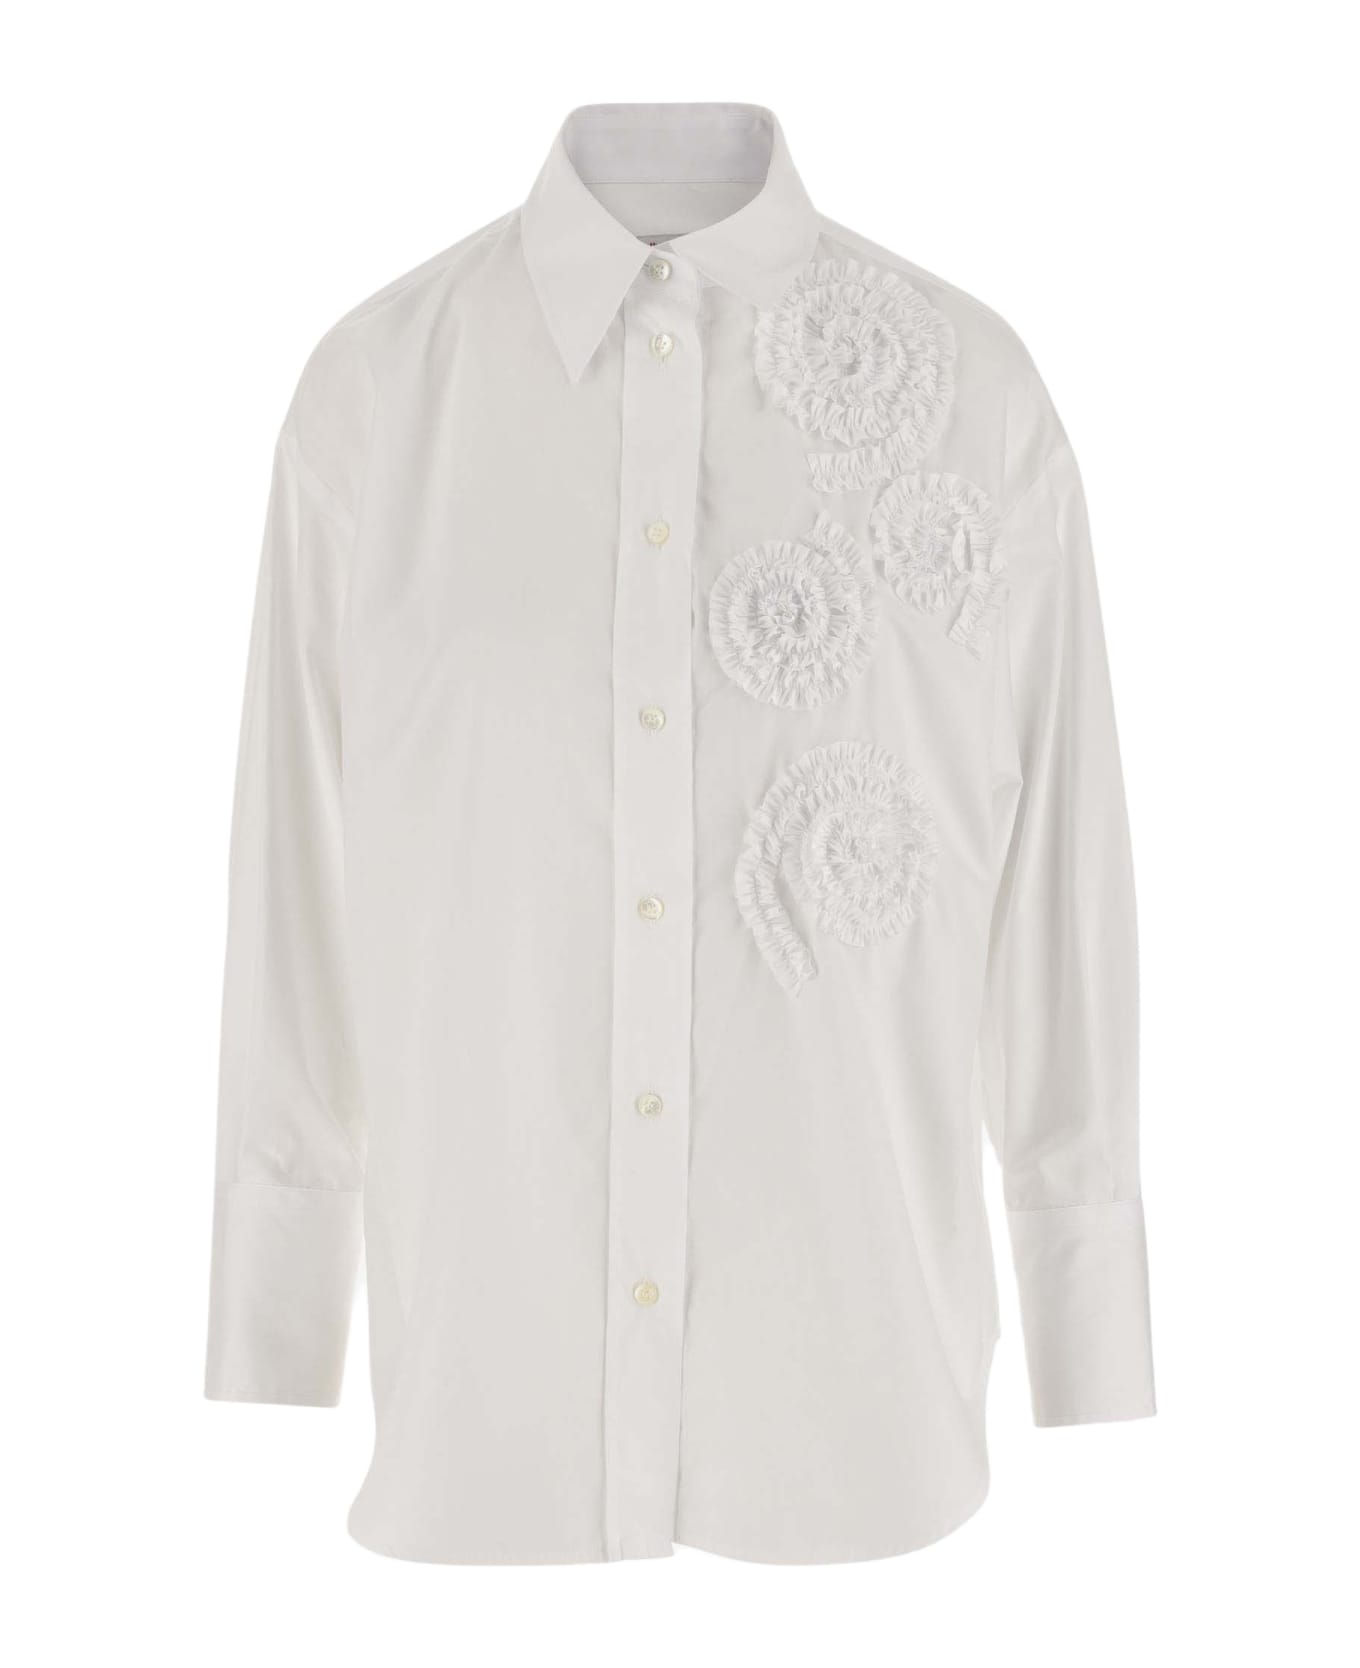 Alberto Biani Cotton Shirt With Embroidery - White シャツ